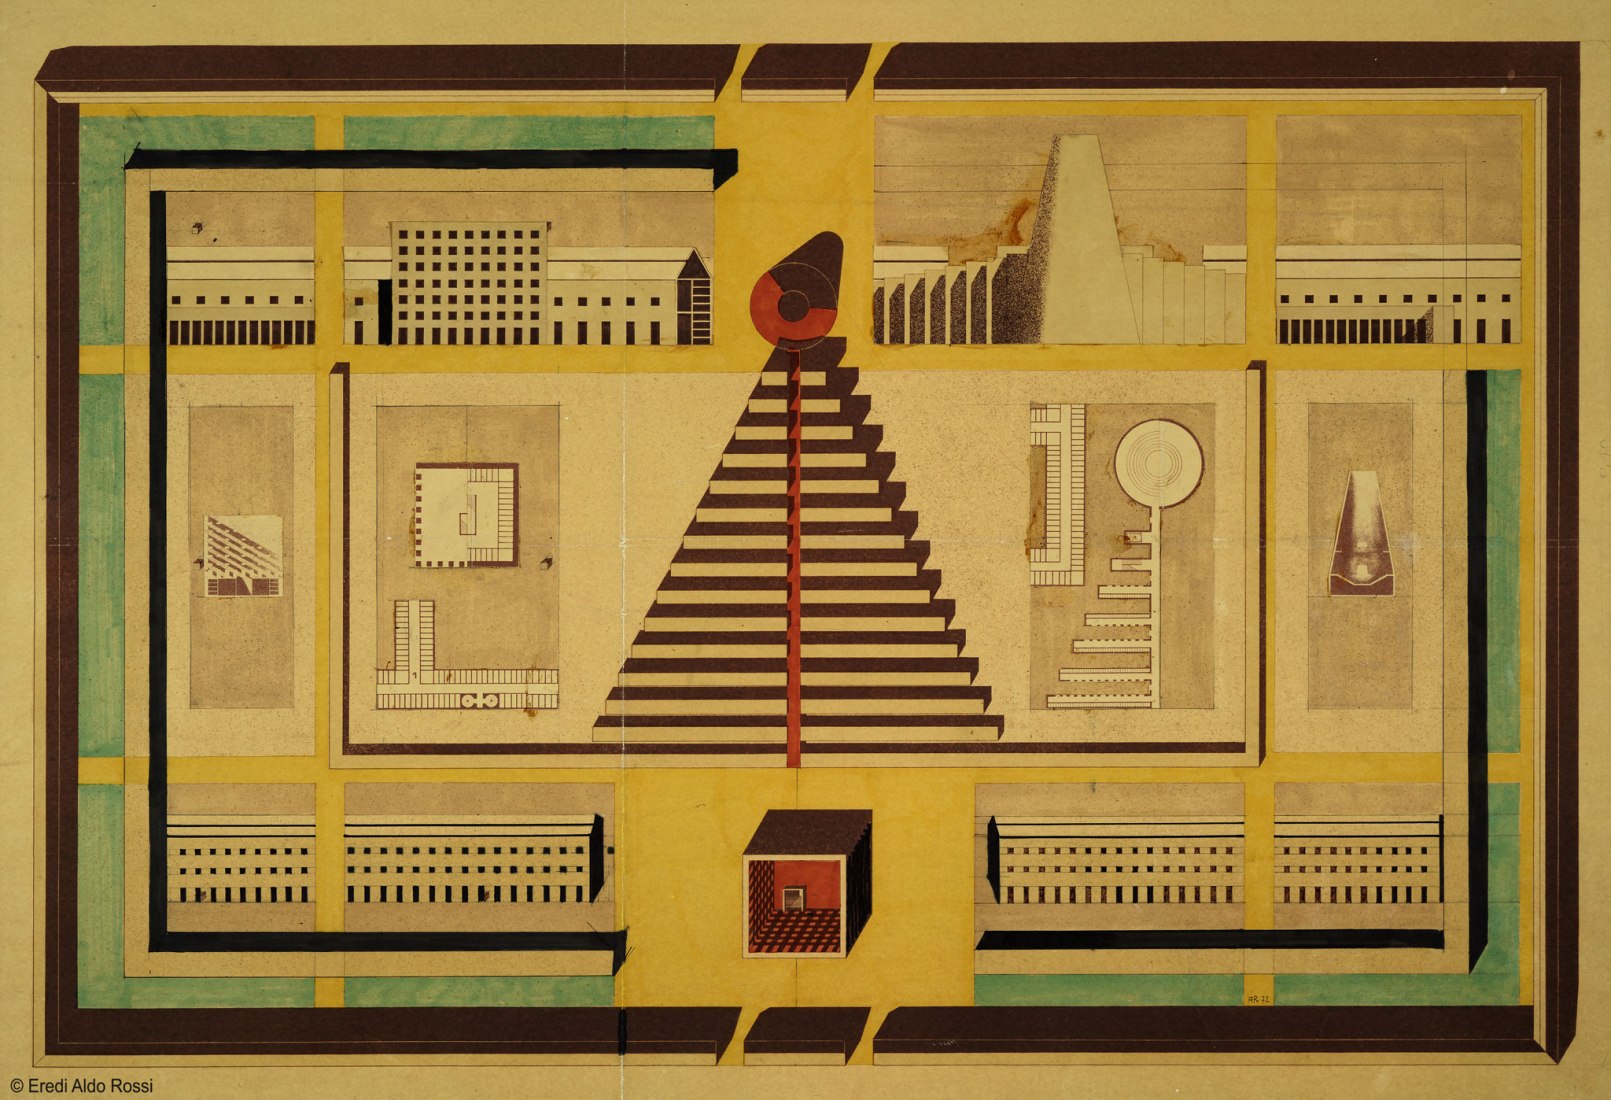 Posts about Aldo Rossi on Architecture of Analogy | Aldo rossi,  Architecture drawing, Aldo